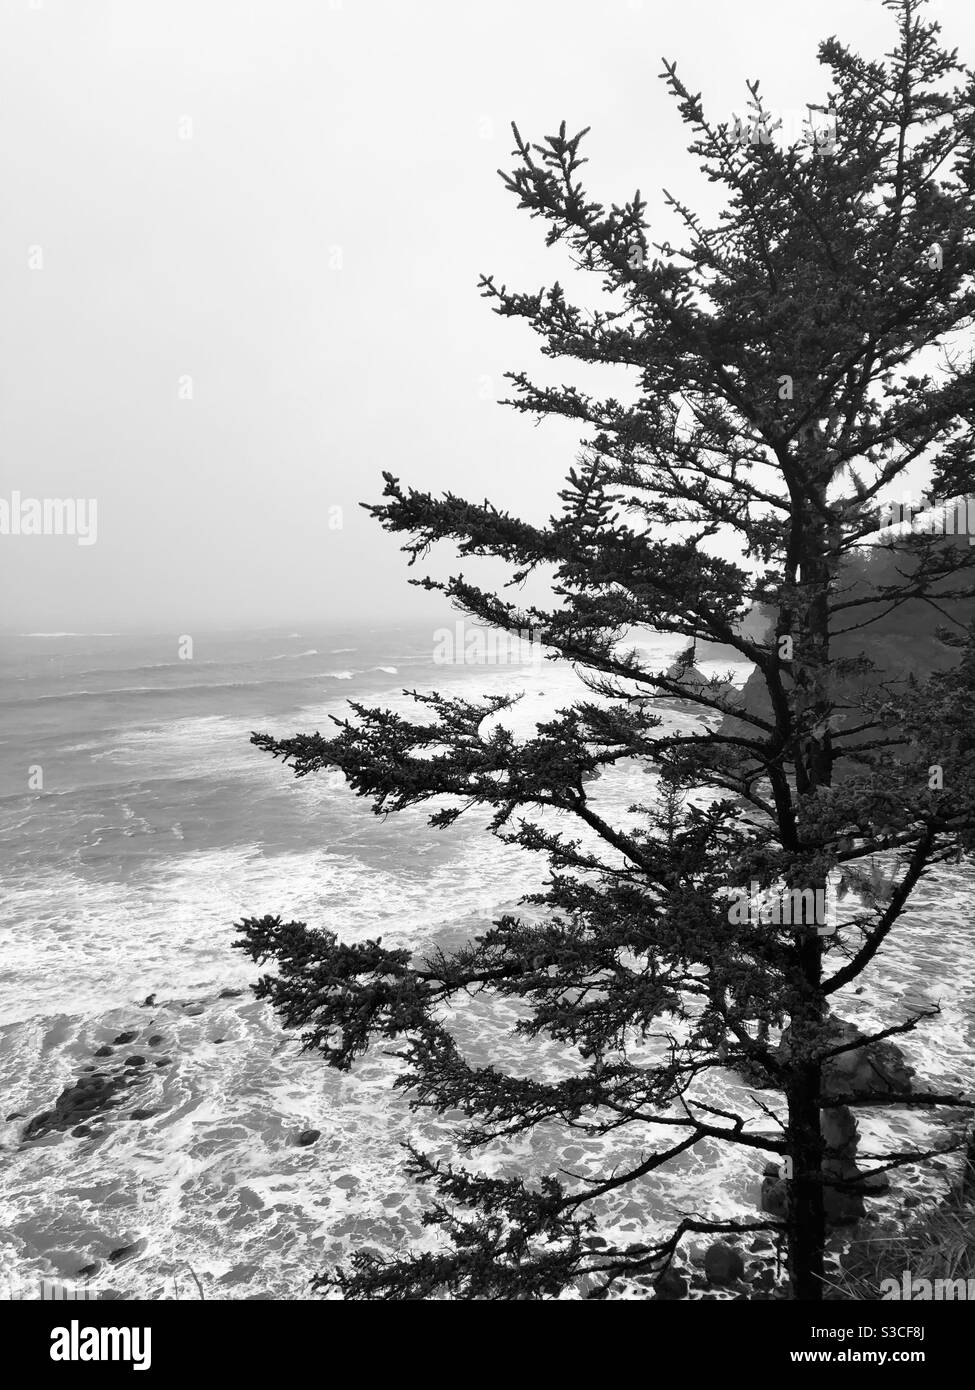 Douglas Fir tree clinging to the side of a cliff over looking the Oregon Coast Pacific Ocean during a gale warning, high surf advisory in January Stock Photo